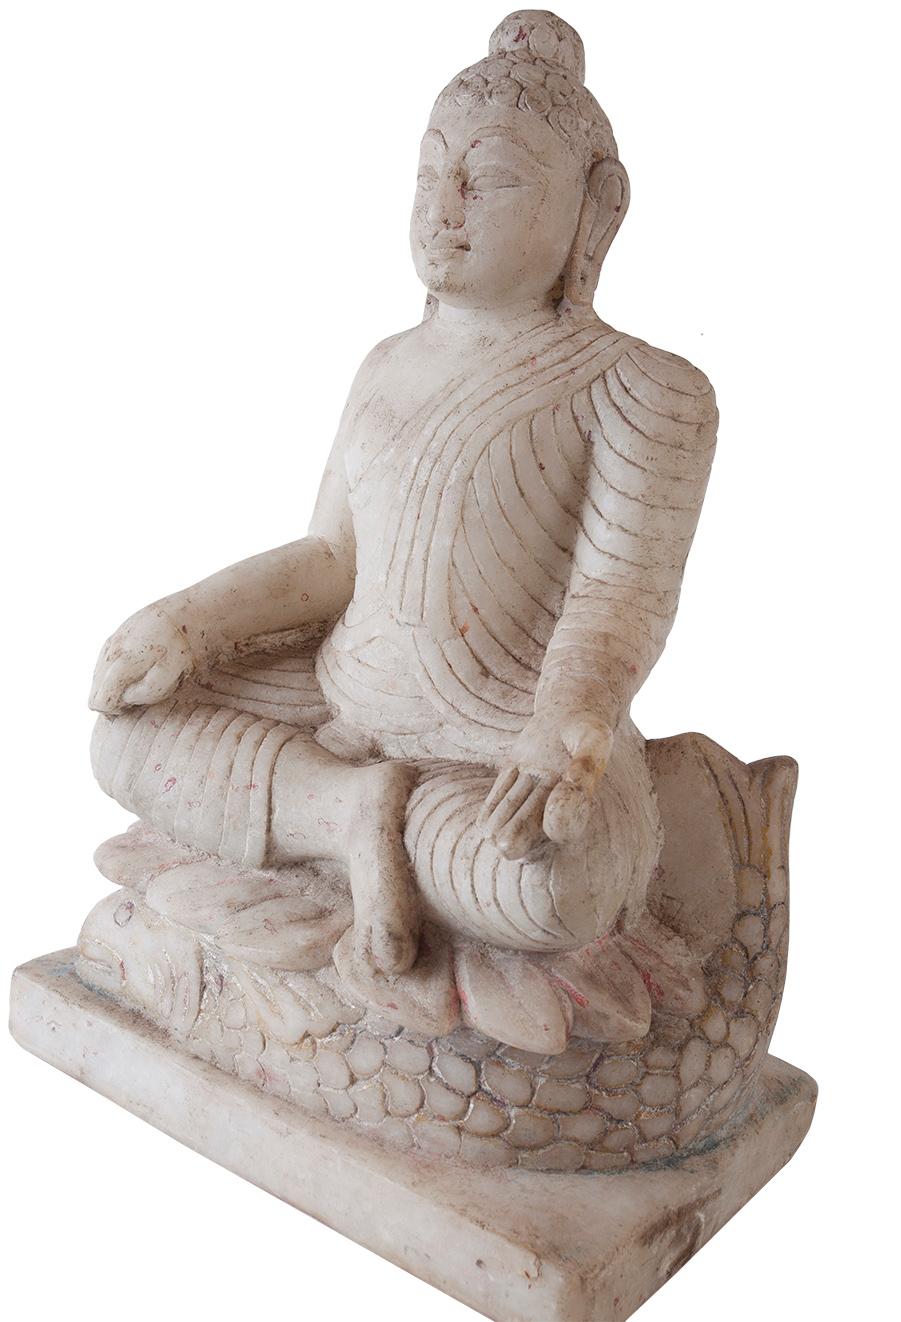 A lovely sitting Buddha in white marble. He sits on the lotus flower symbolic of purity and enlightenment and yet still connected to the grounding of the life connections below--the fish, the roots, the earth. The posture is the Bhumisparsha Mudra,